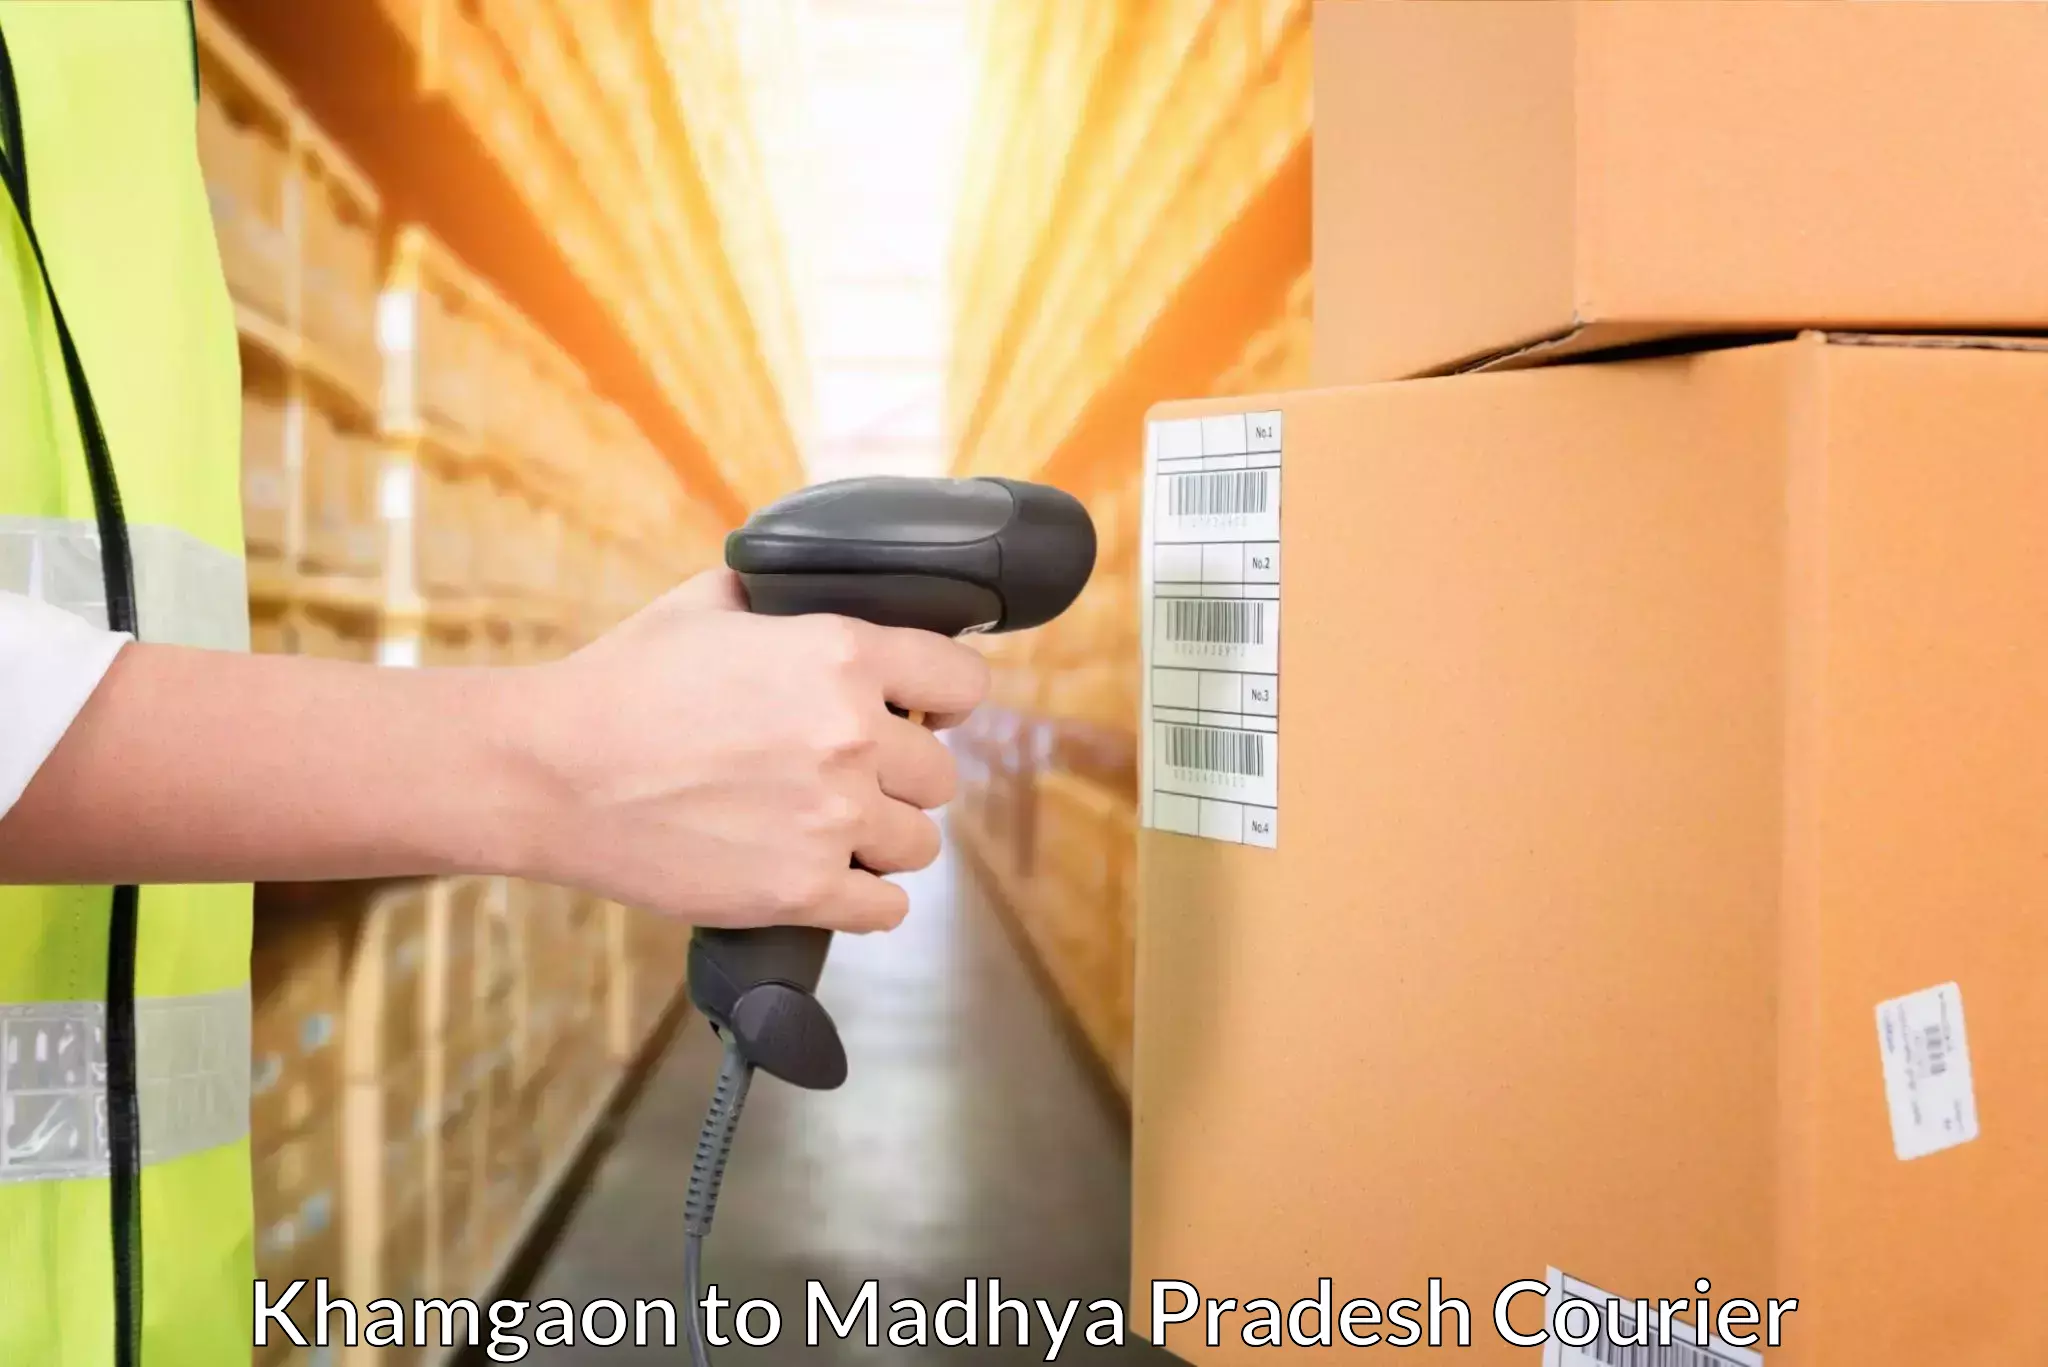 State-of-the-art courier technology Khamgaon to Chanderi